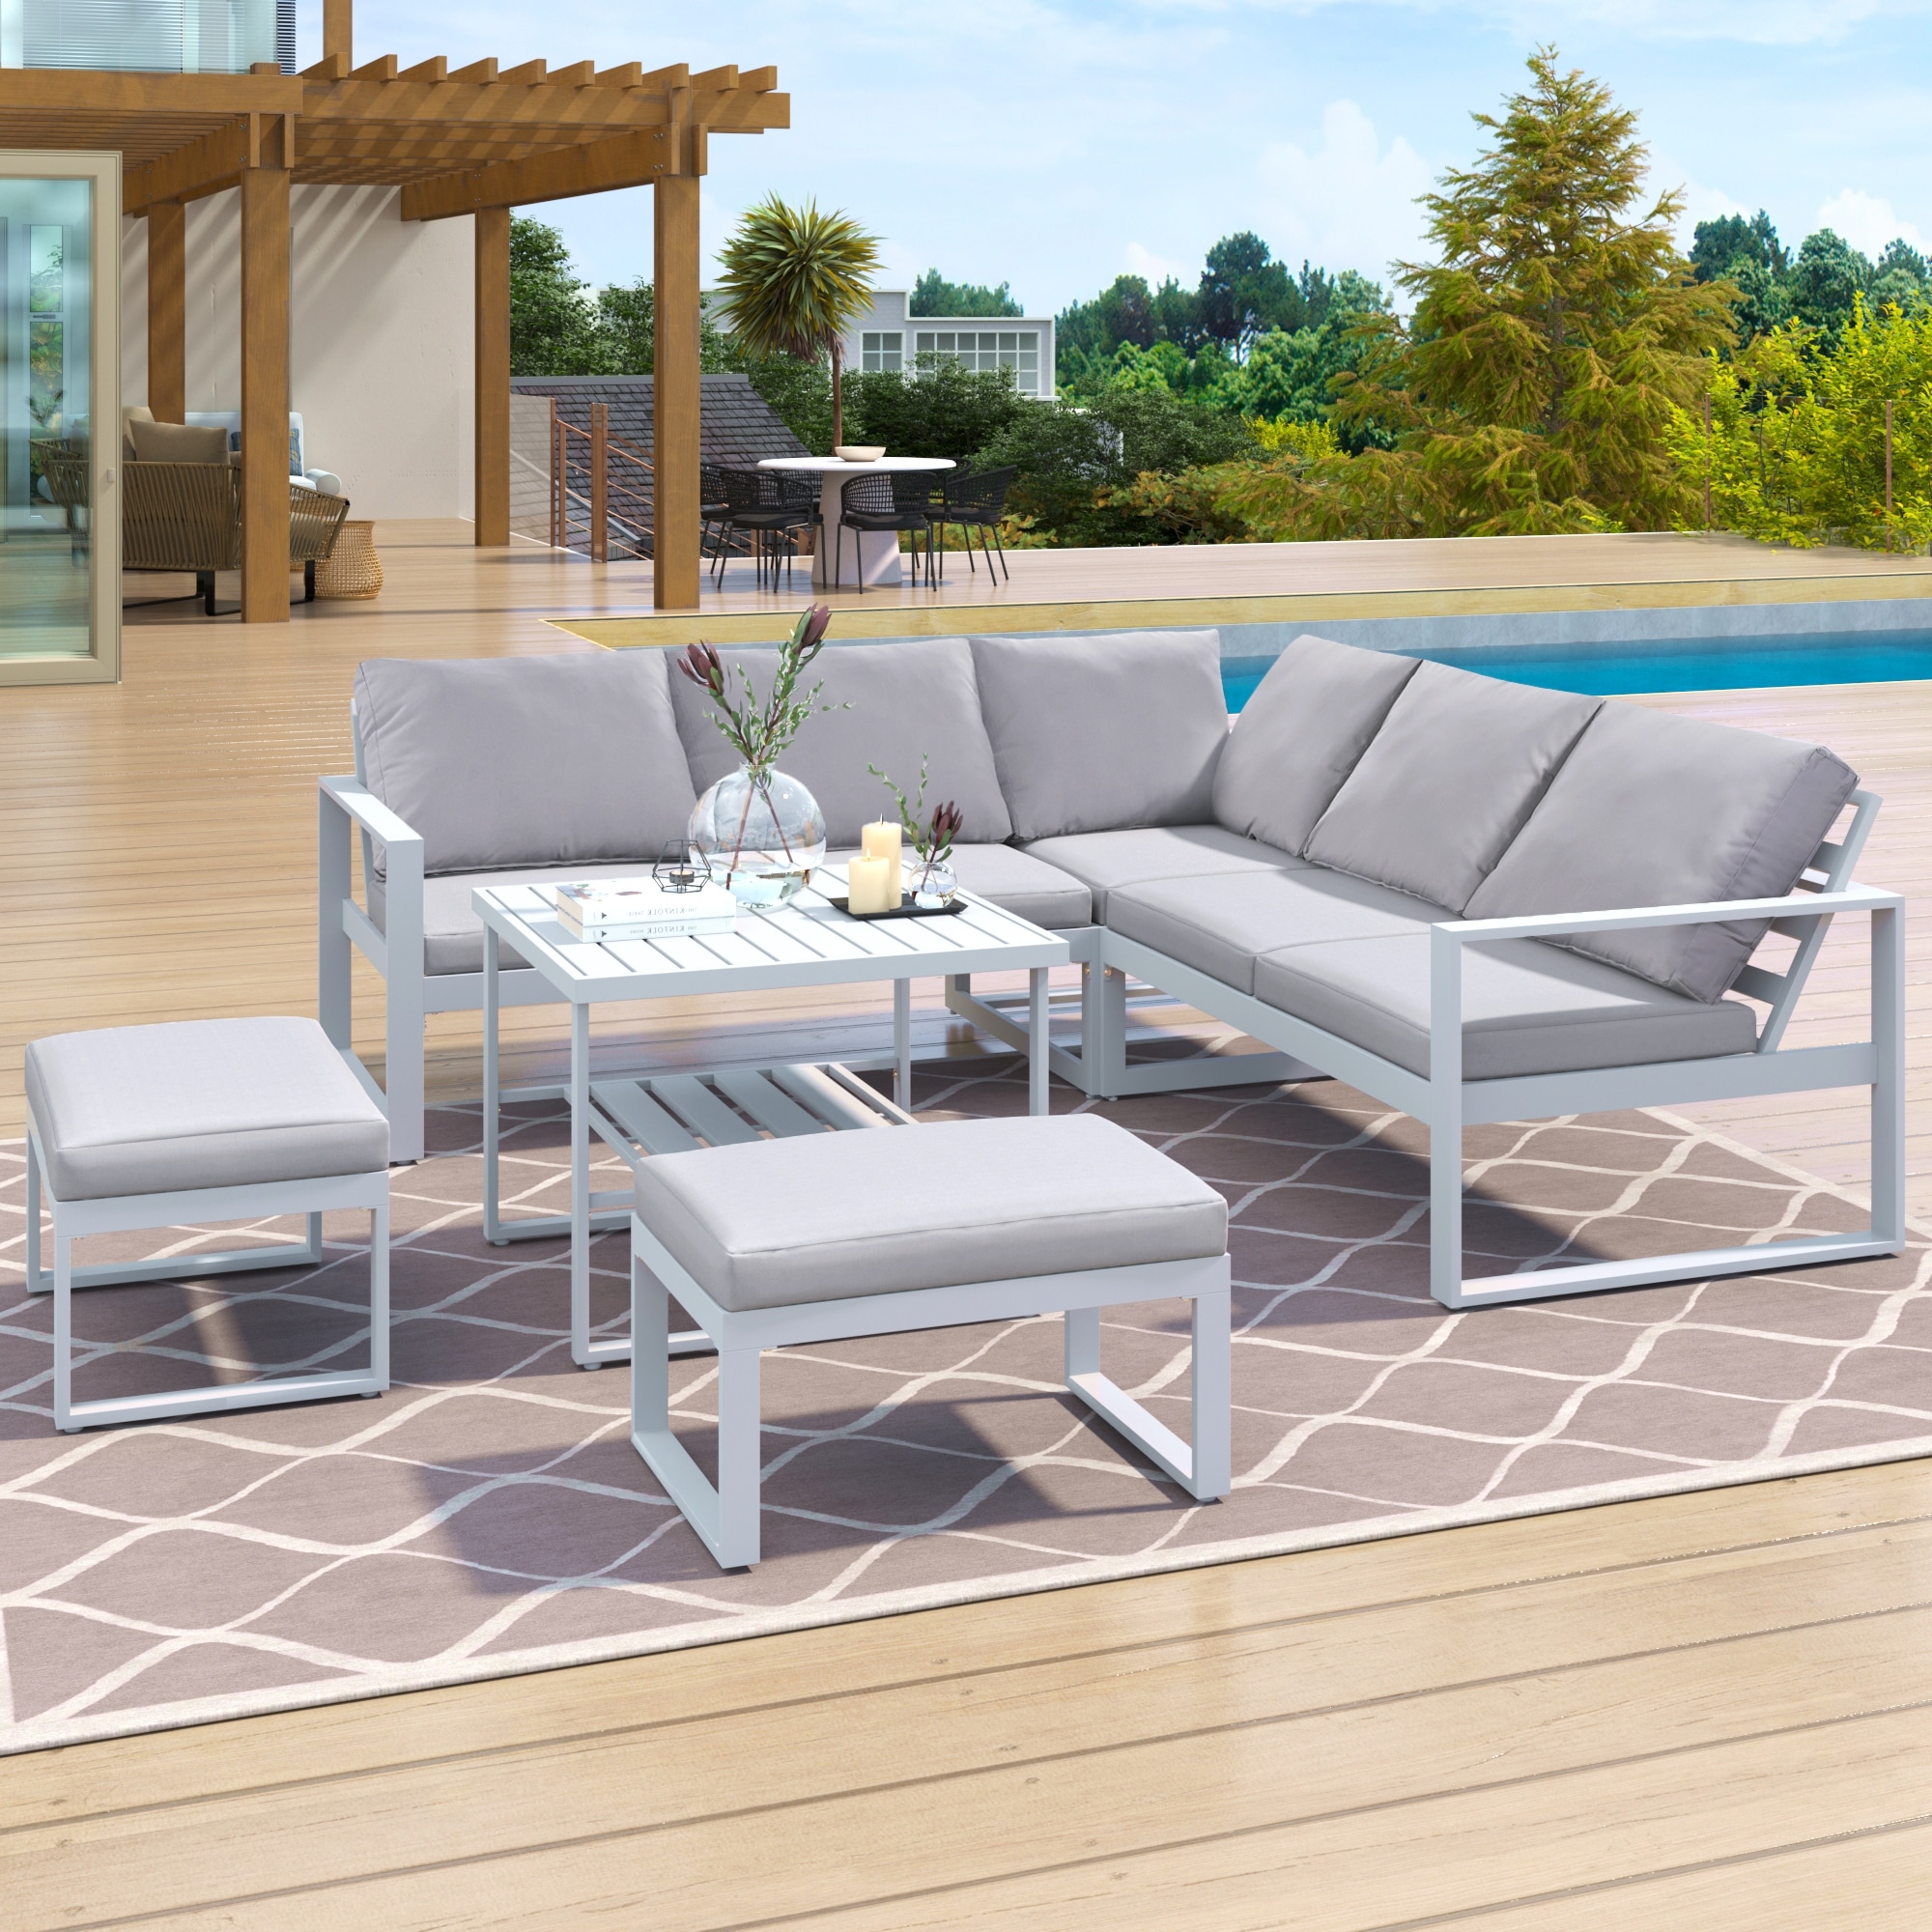 Industrial Style Outdoor Sofa Combination Set With 2 Love Sofa 1 Single Sofa 1 Table 2 Bench